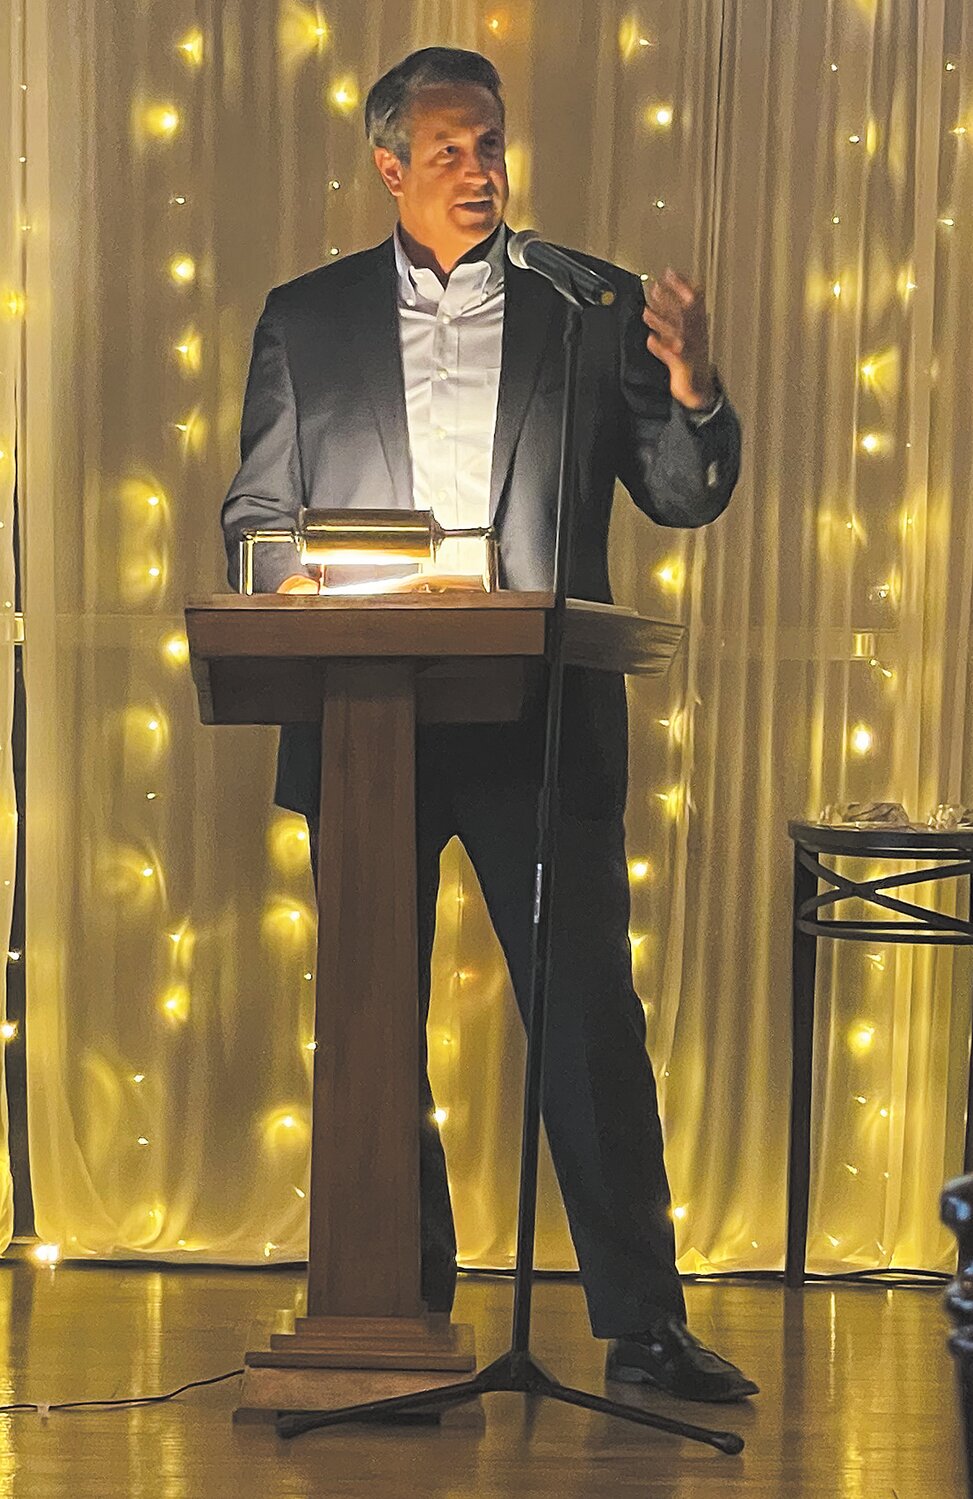 Nate Feltman was the keynote speaker at the annual Crawfordsville/Montgomery County Chamber of Commerce banquet on Thursday at Stone Creek Lodge.